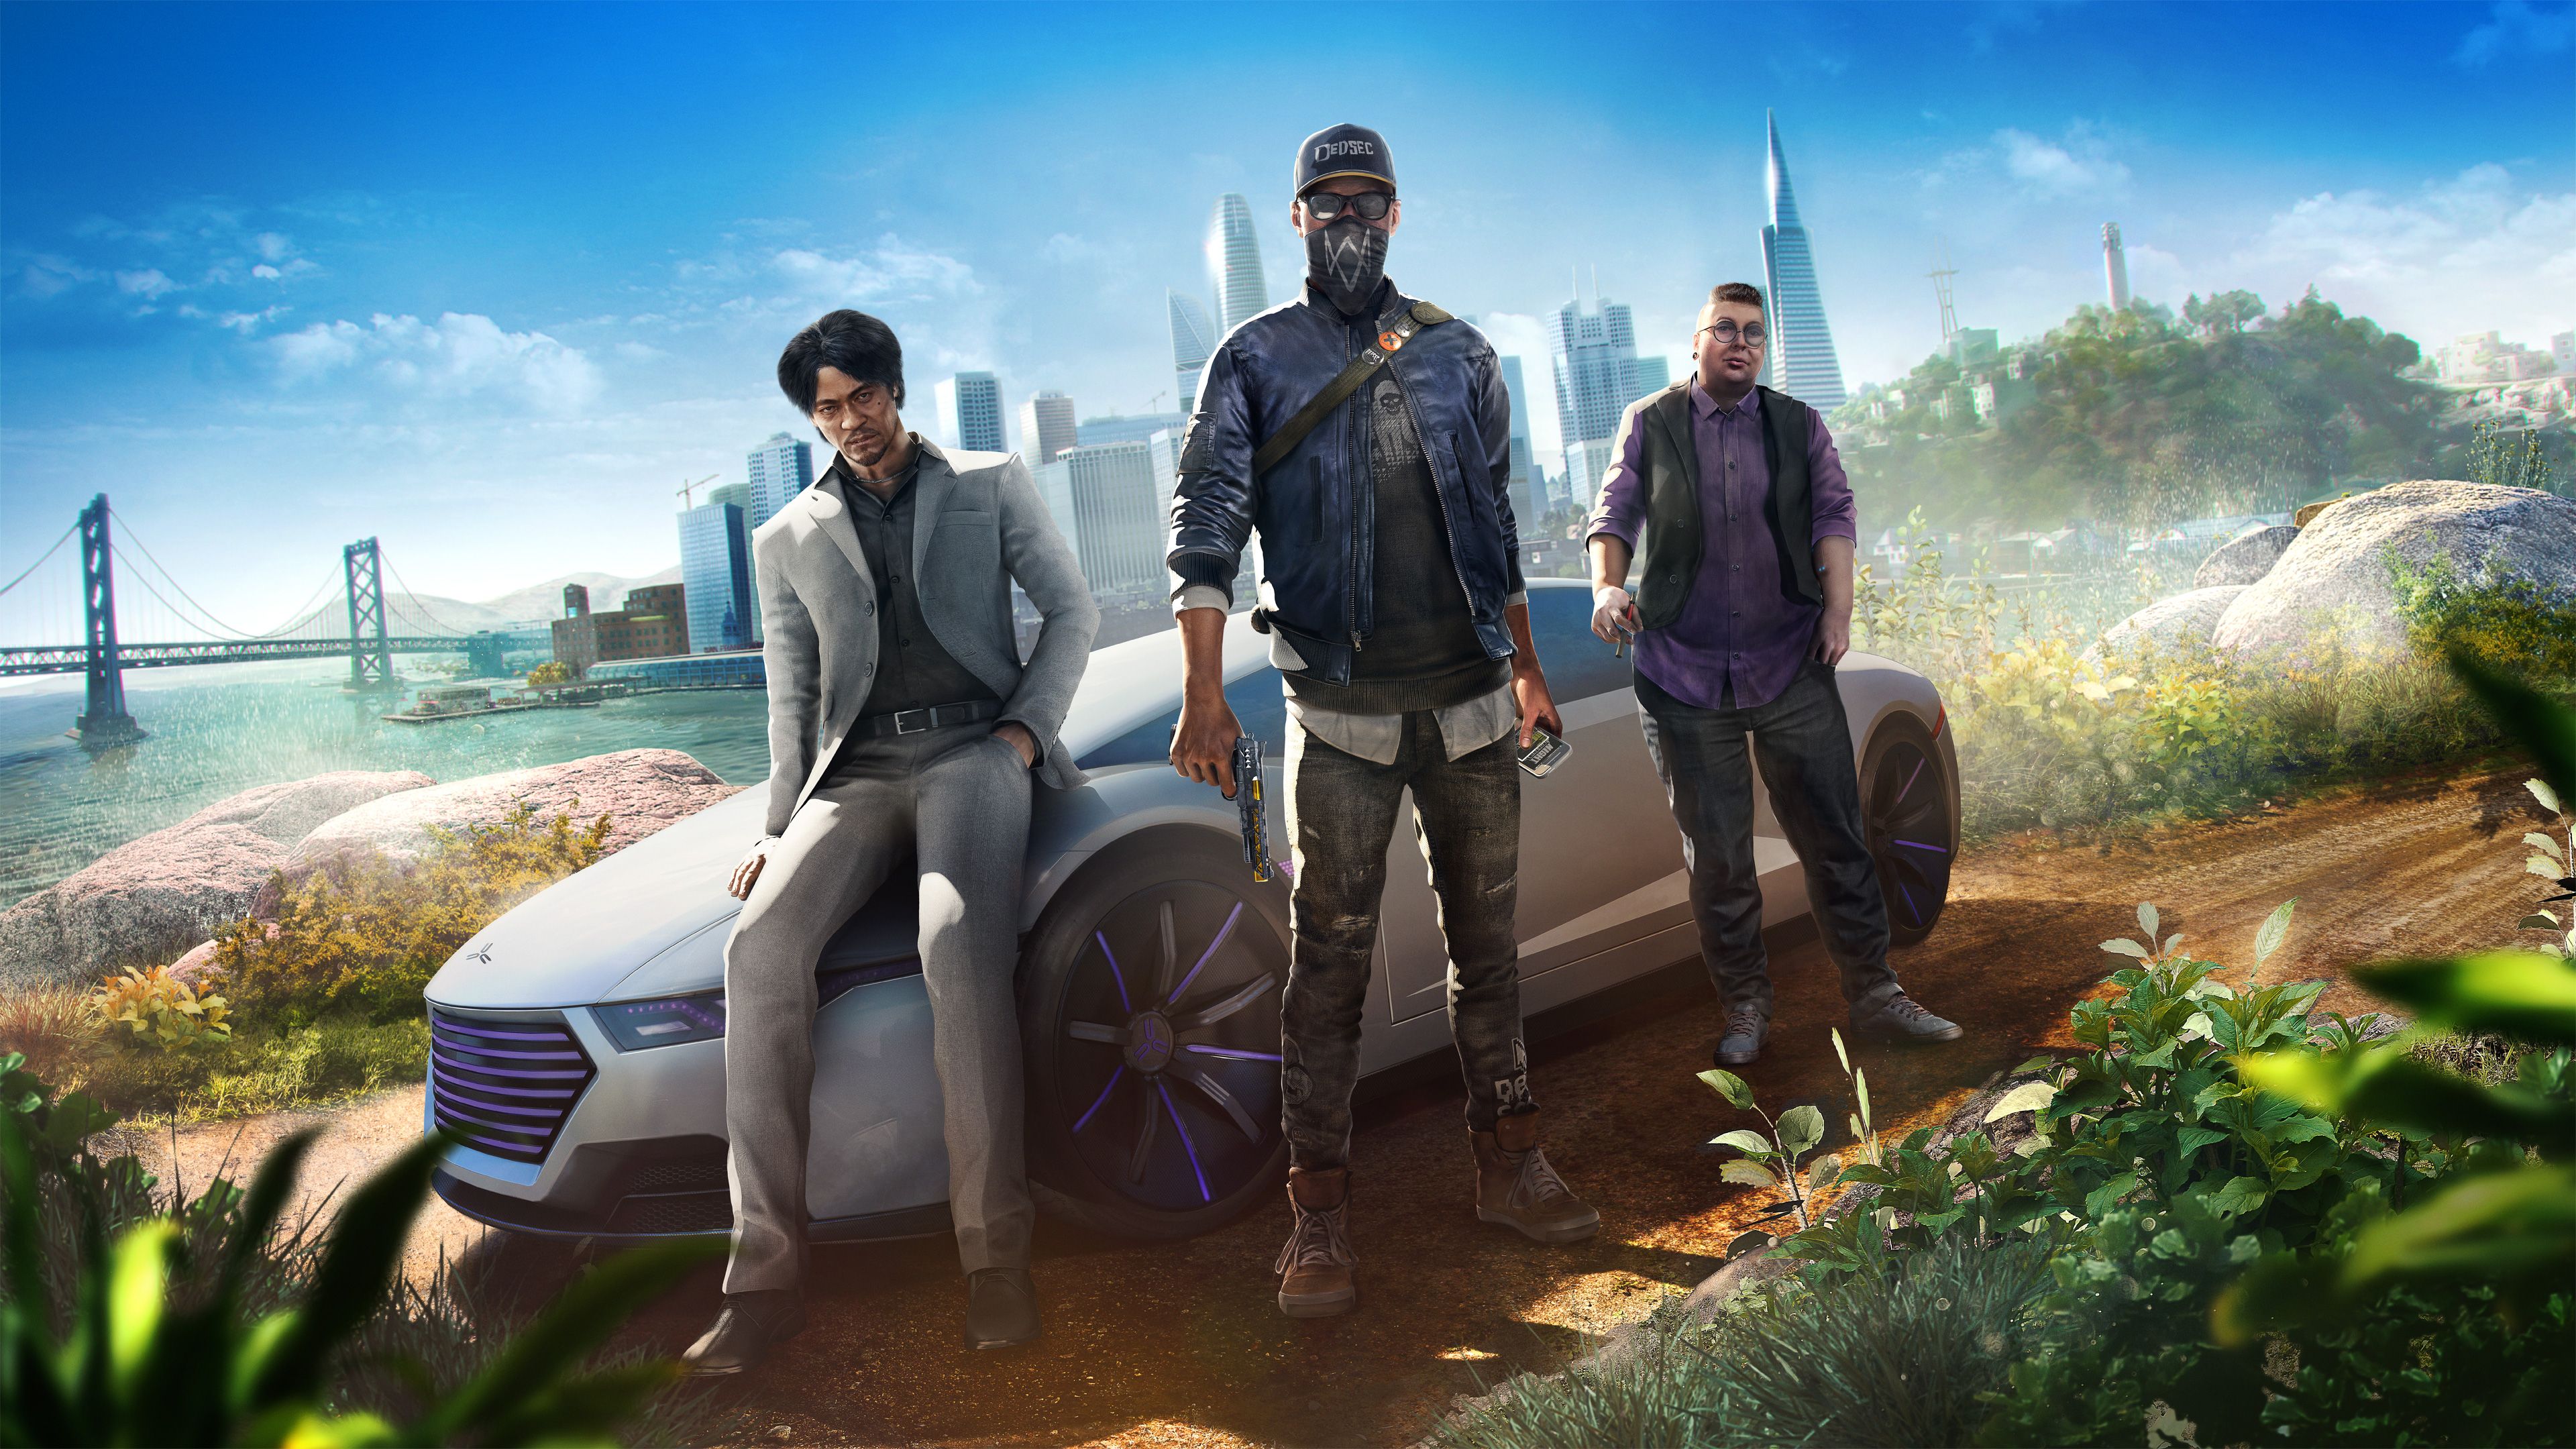 Watch Dogs 2 Video Game Wallpaper Background 62003 3840x2160 px